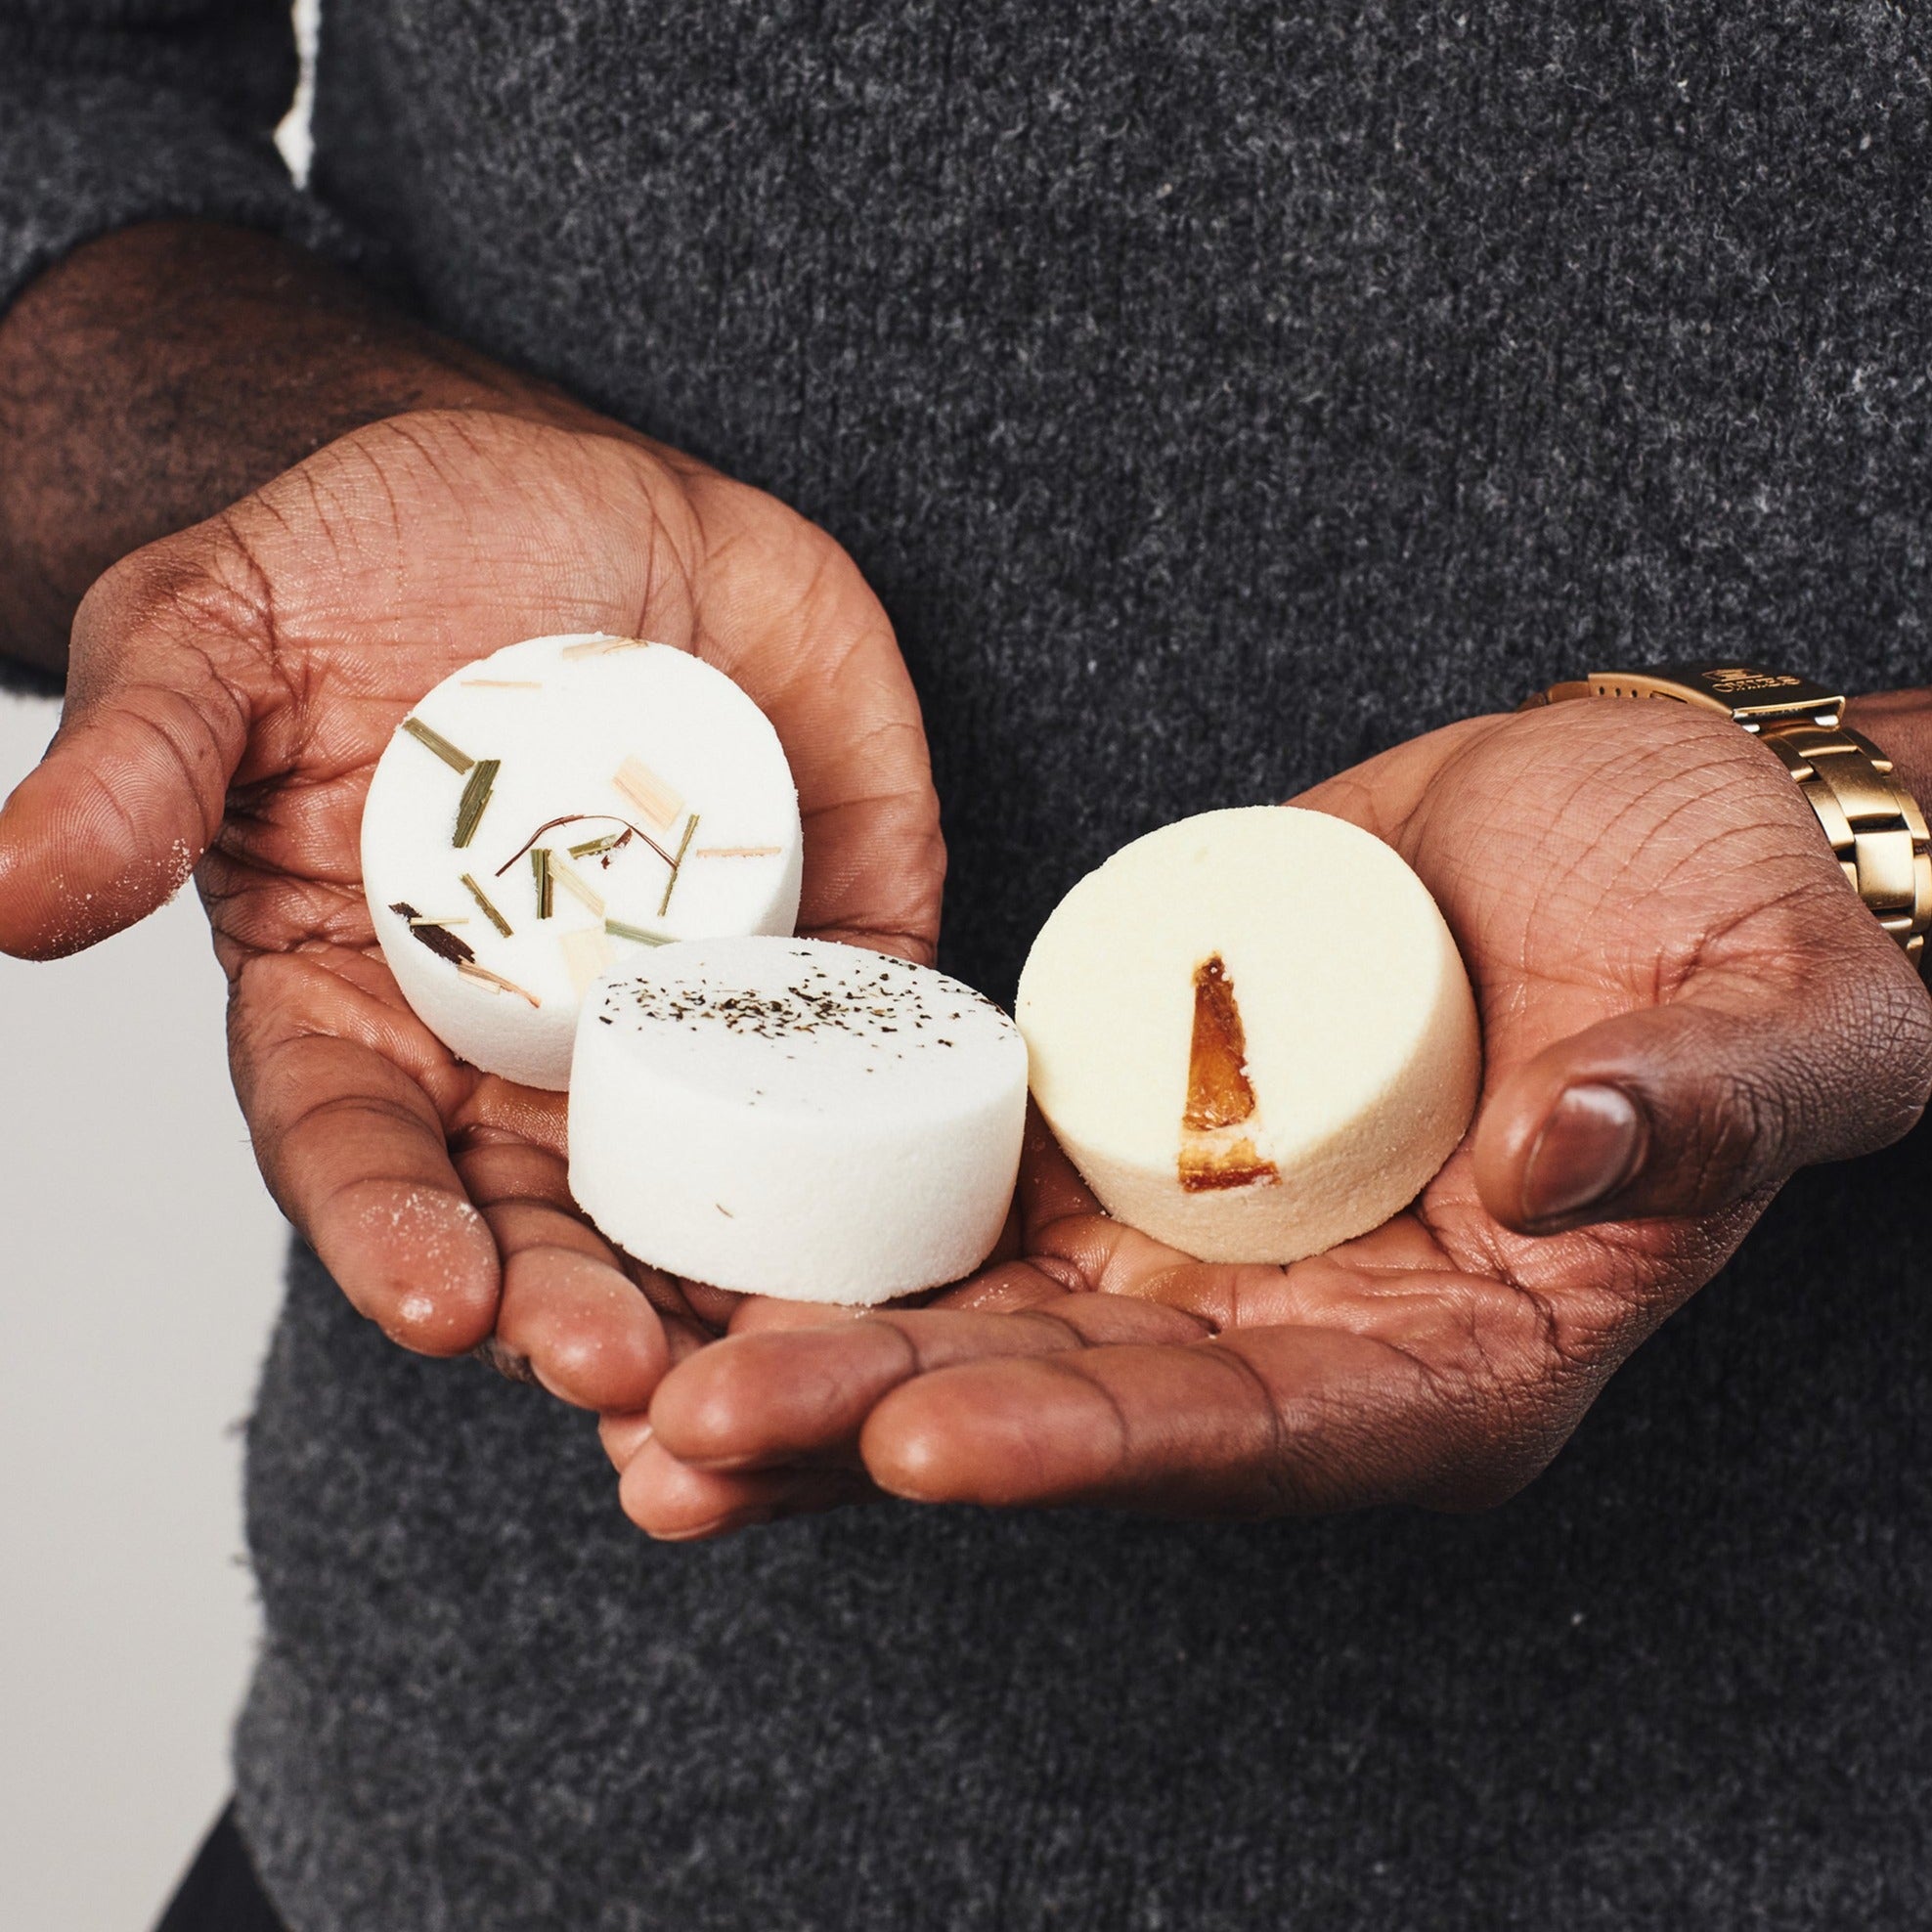 The image shows a man holding three aromatherapy shower steamers with unique botanicals placed on top. The first steamer is labeled 